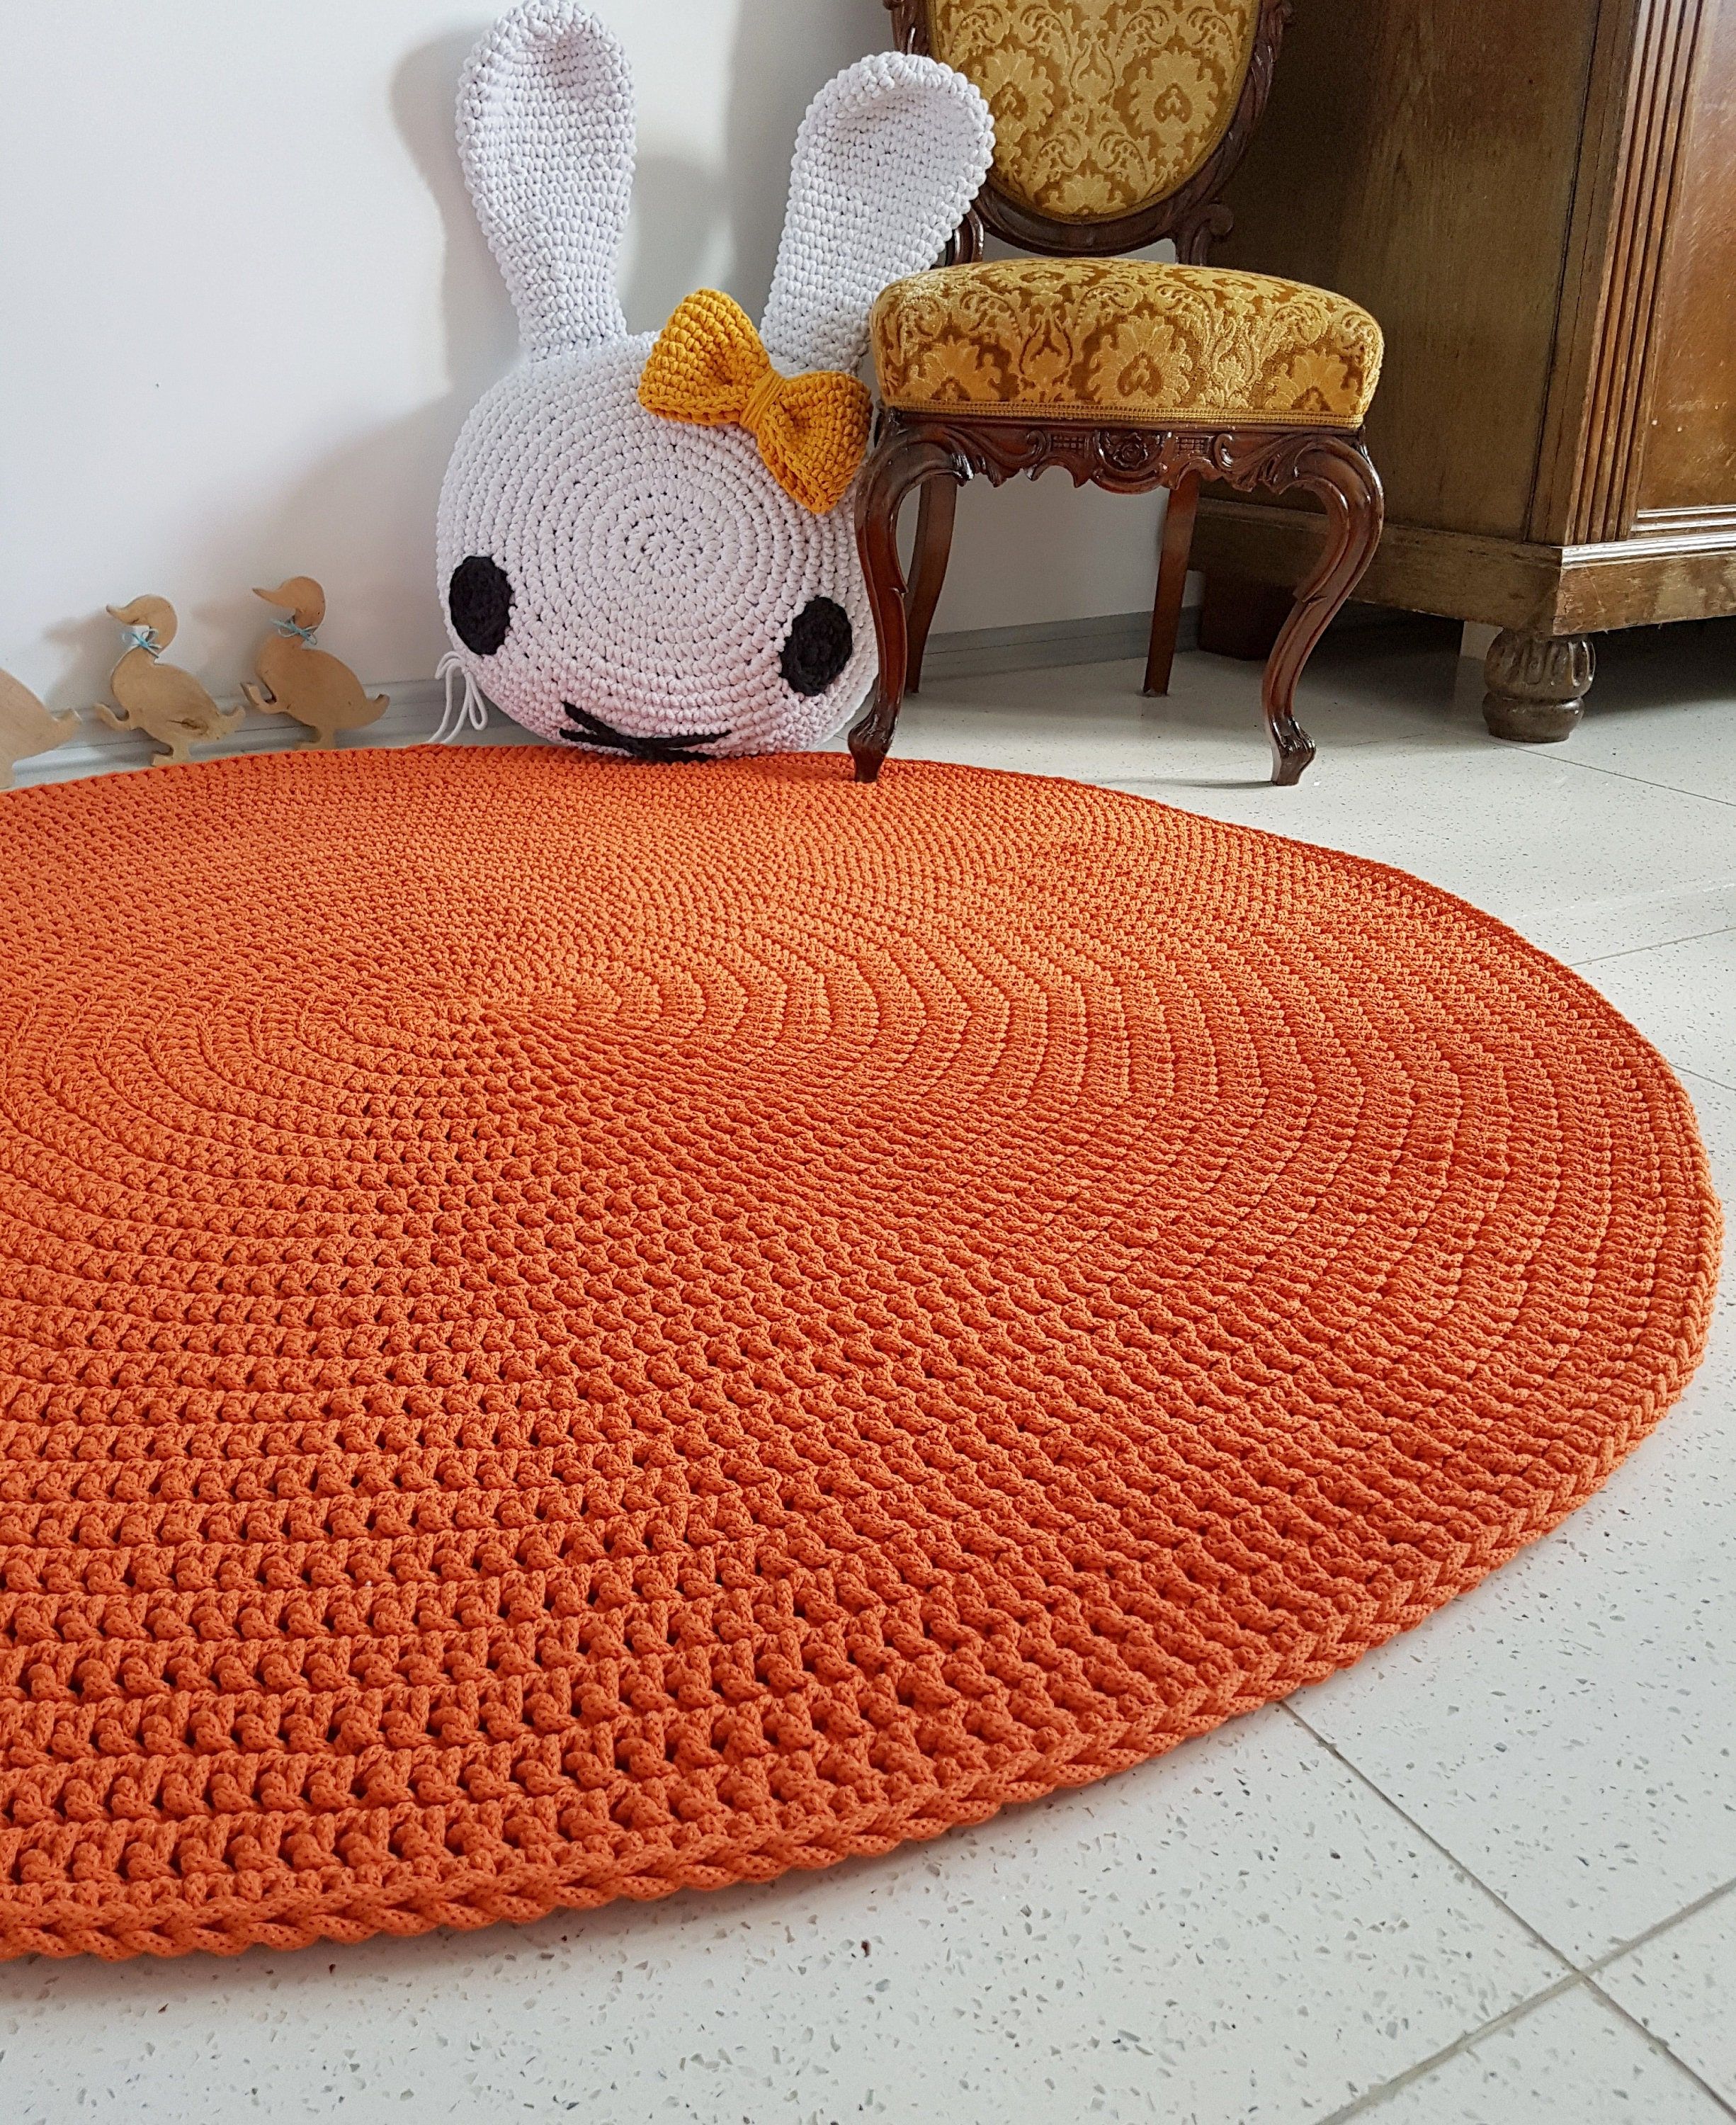 Featured Photo of 15 Best Collection of Orange Round Rugs